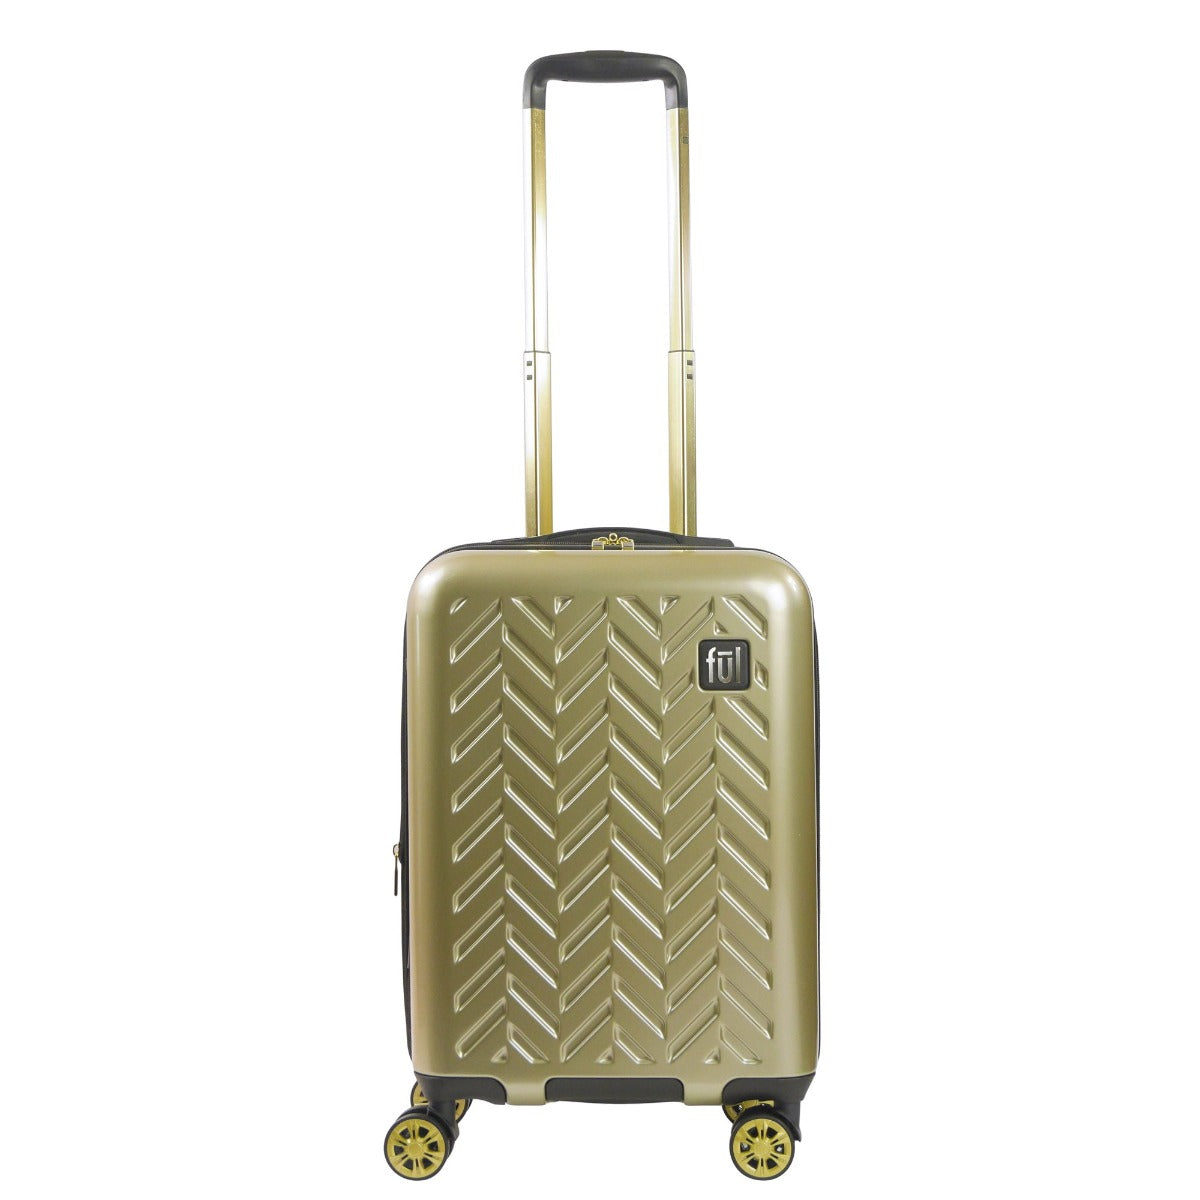 Ful Groove 22 inch carry-on hardside spinner suitcase gold luggage